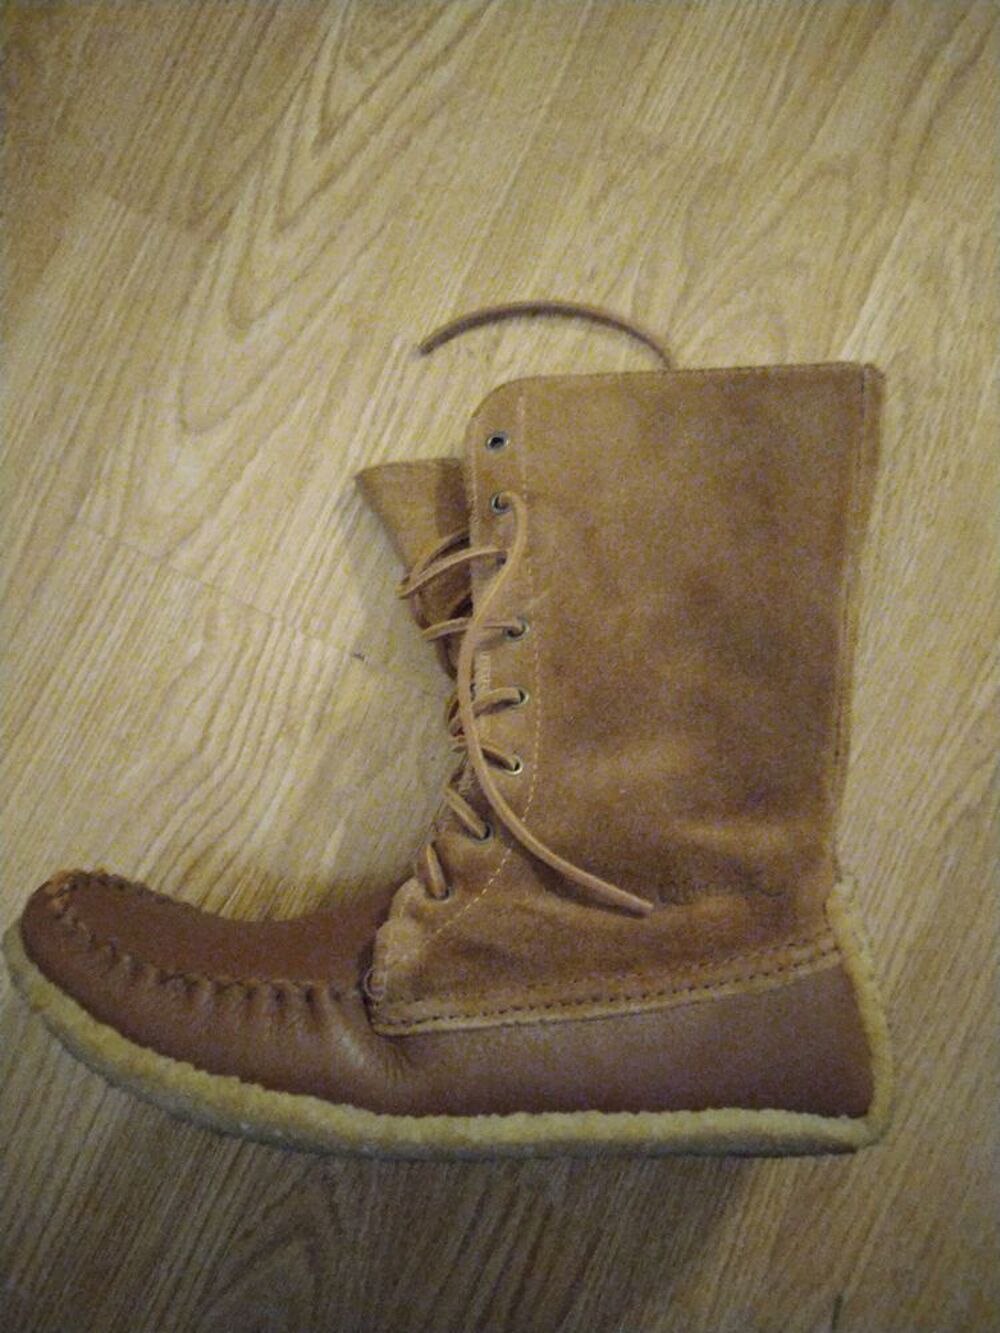 Bottes mocassin Canadienne
Chaussures